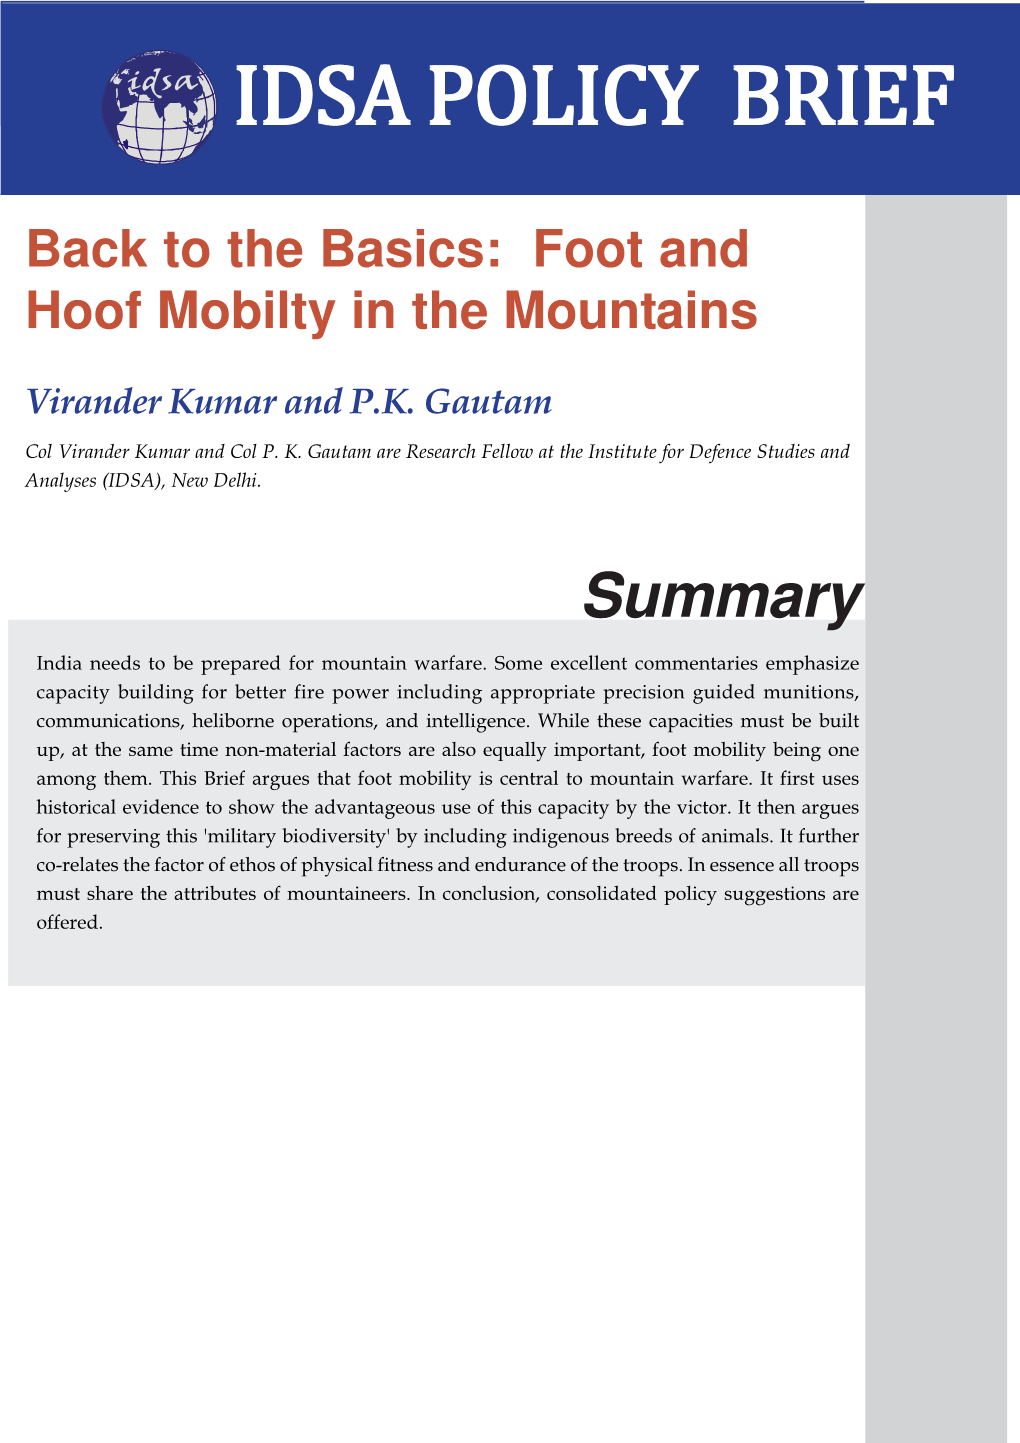 Back to the Basics: Foot and Hoof Mobilty in the Mountains